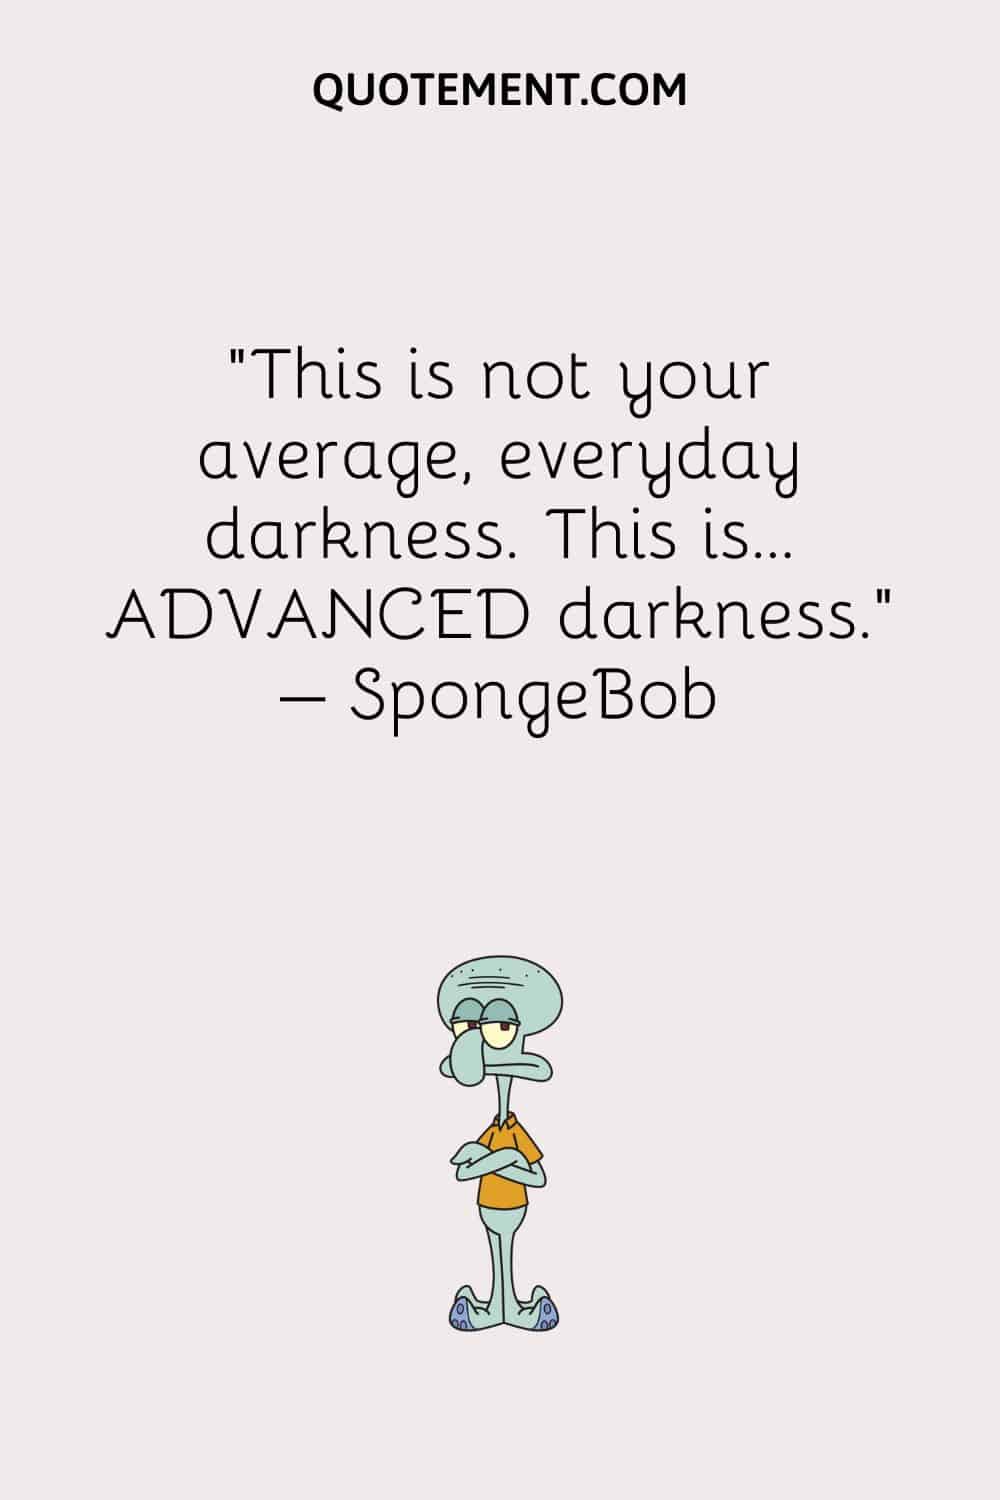 “This is not your average, everyday darkness. This is… ADVANCED darkness.” – SpongeBob